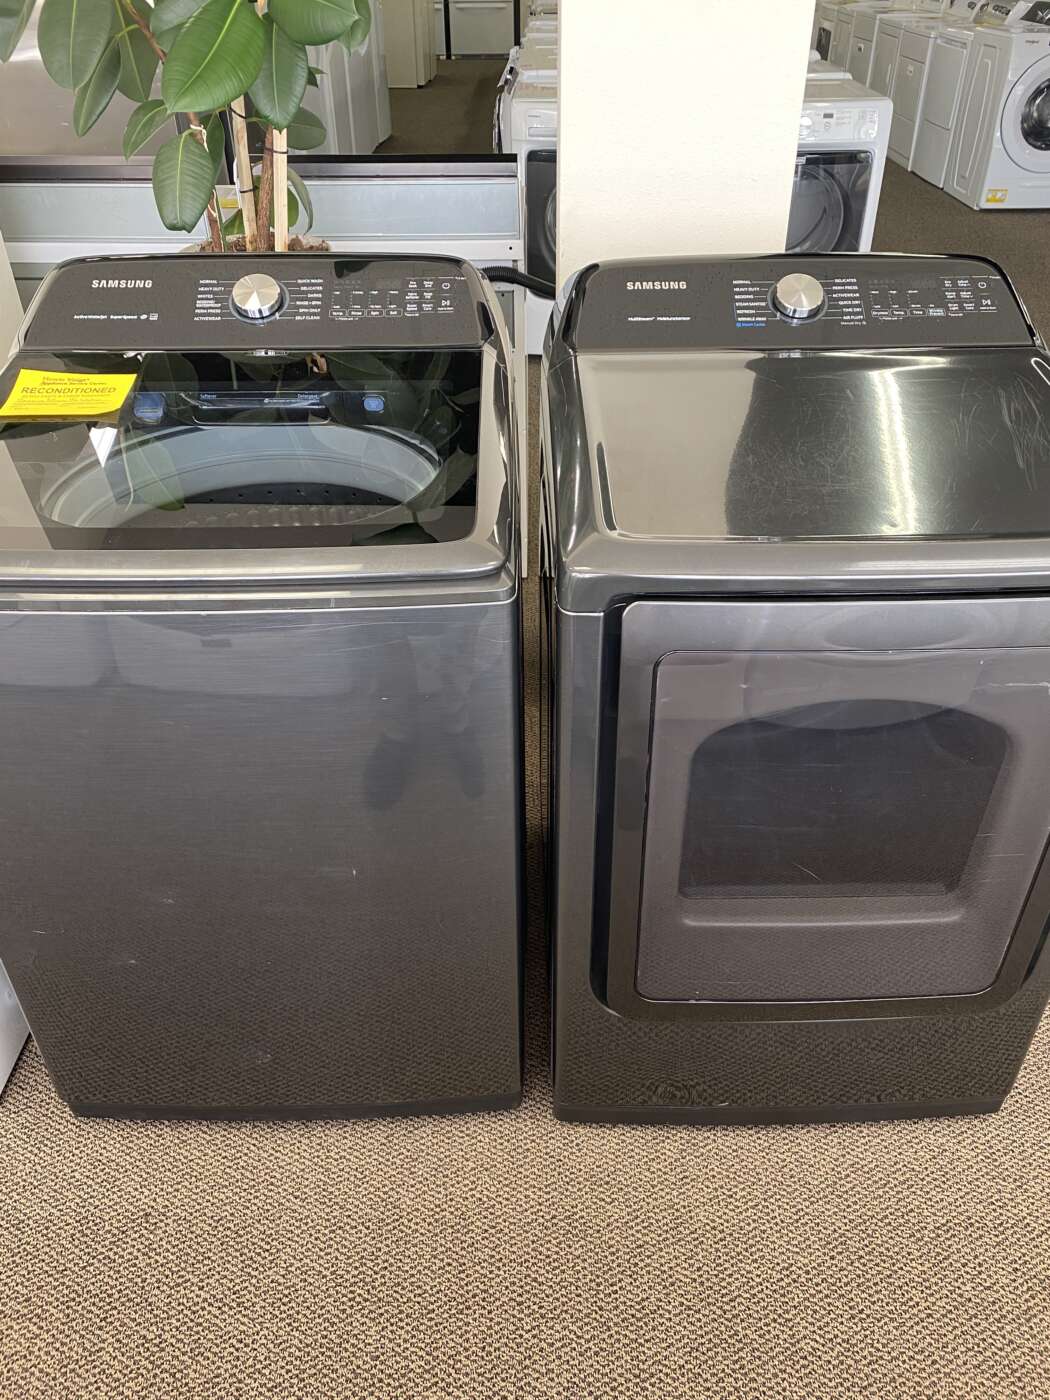 Reconditioned SAMSUNG 5.0 cu. ft. Top-Load  Washer and 7.4 cu. ft. Electric Dryer Set- Black Stainless